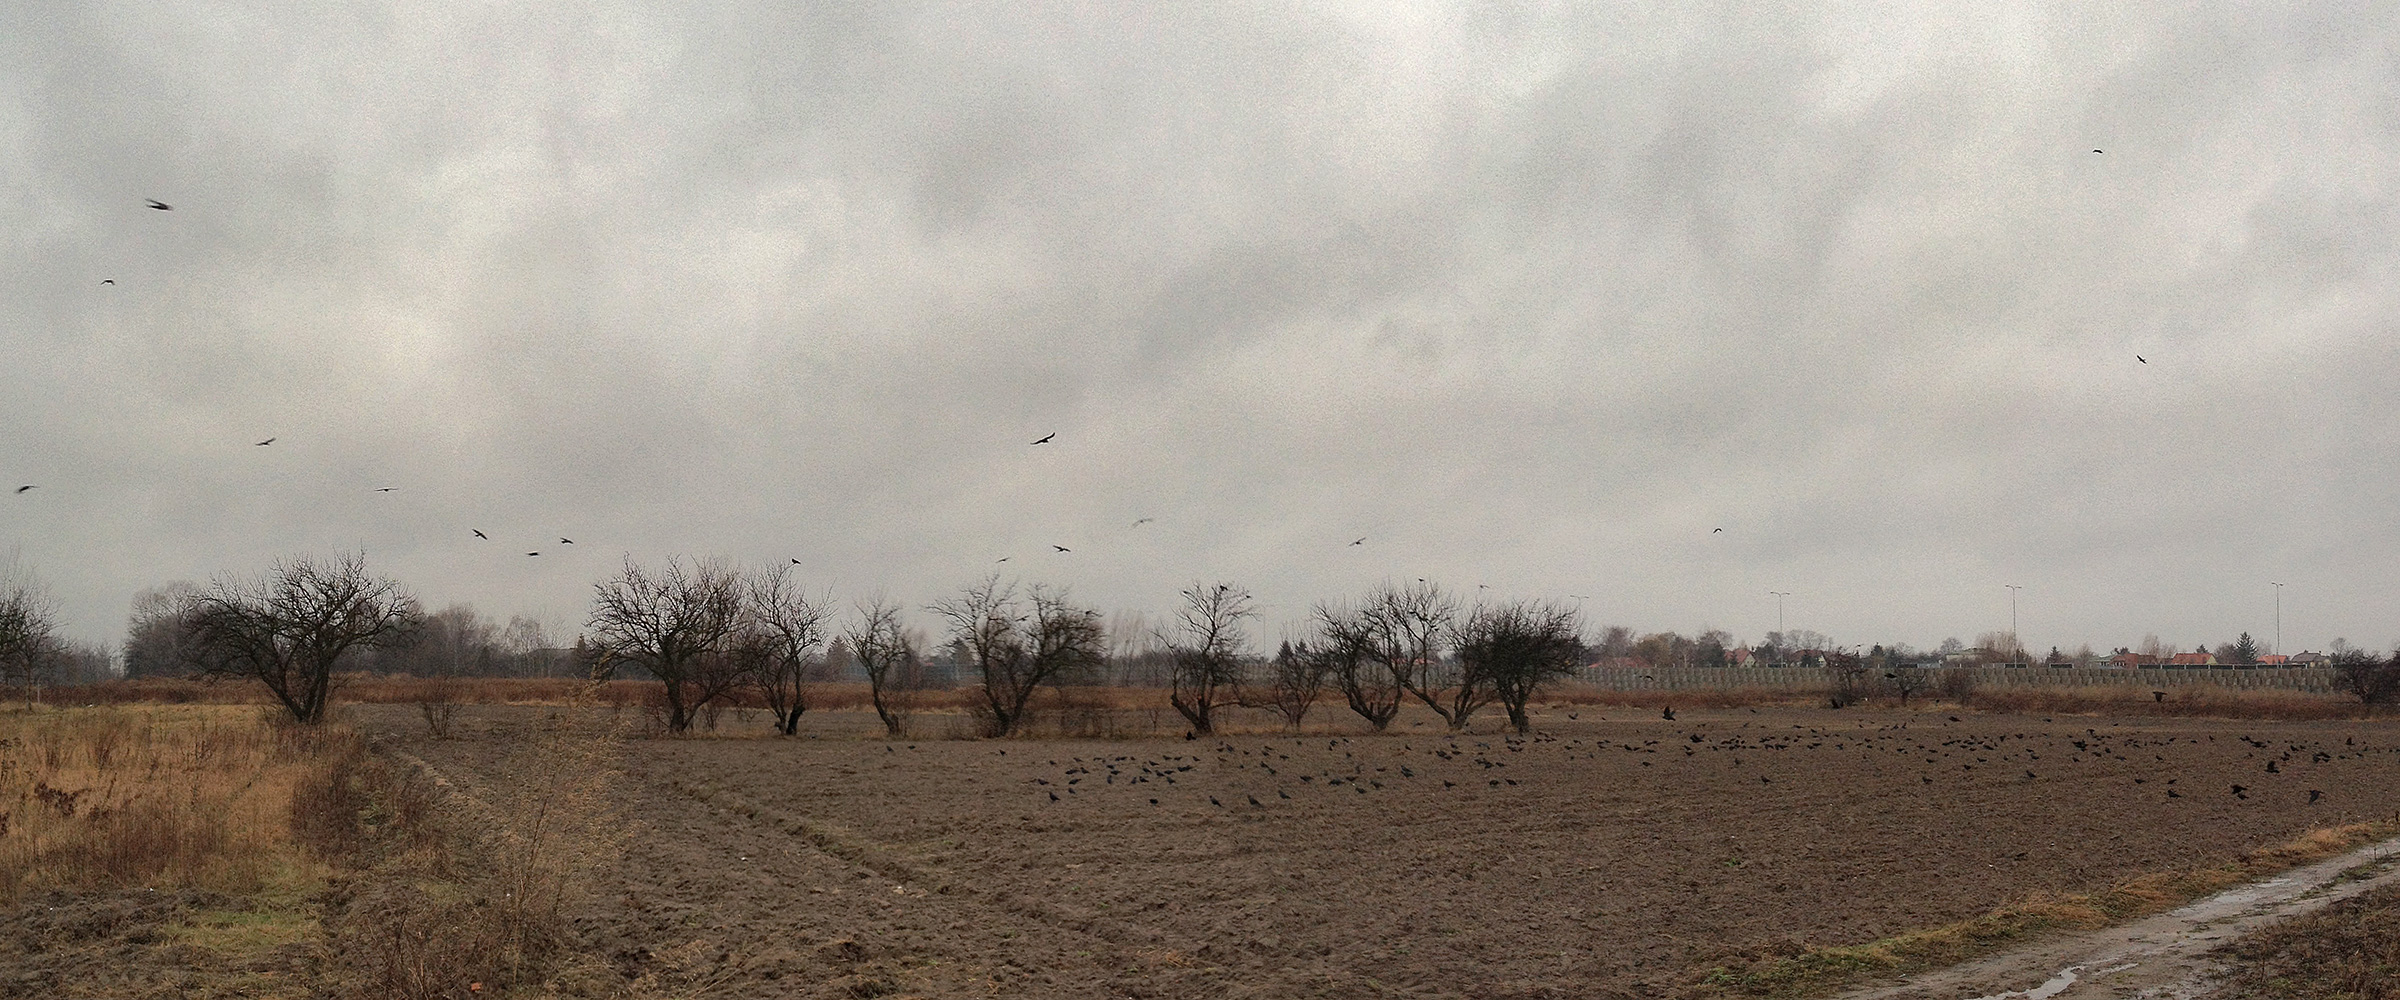 PANORAMA DIARY | Iphoneography blog | Crows and ravens